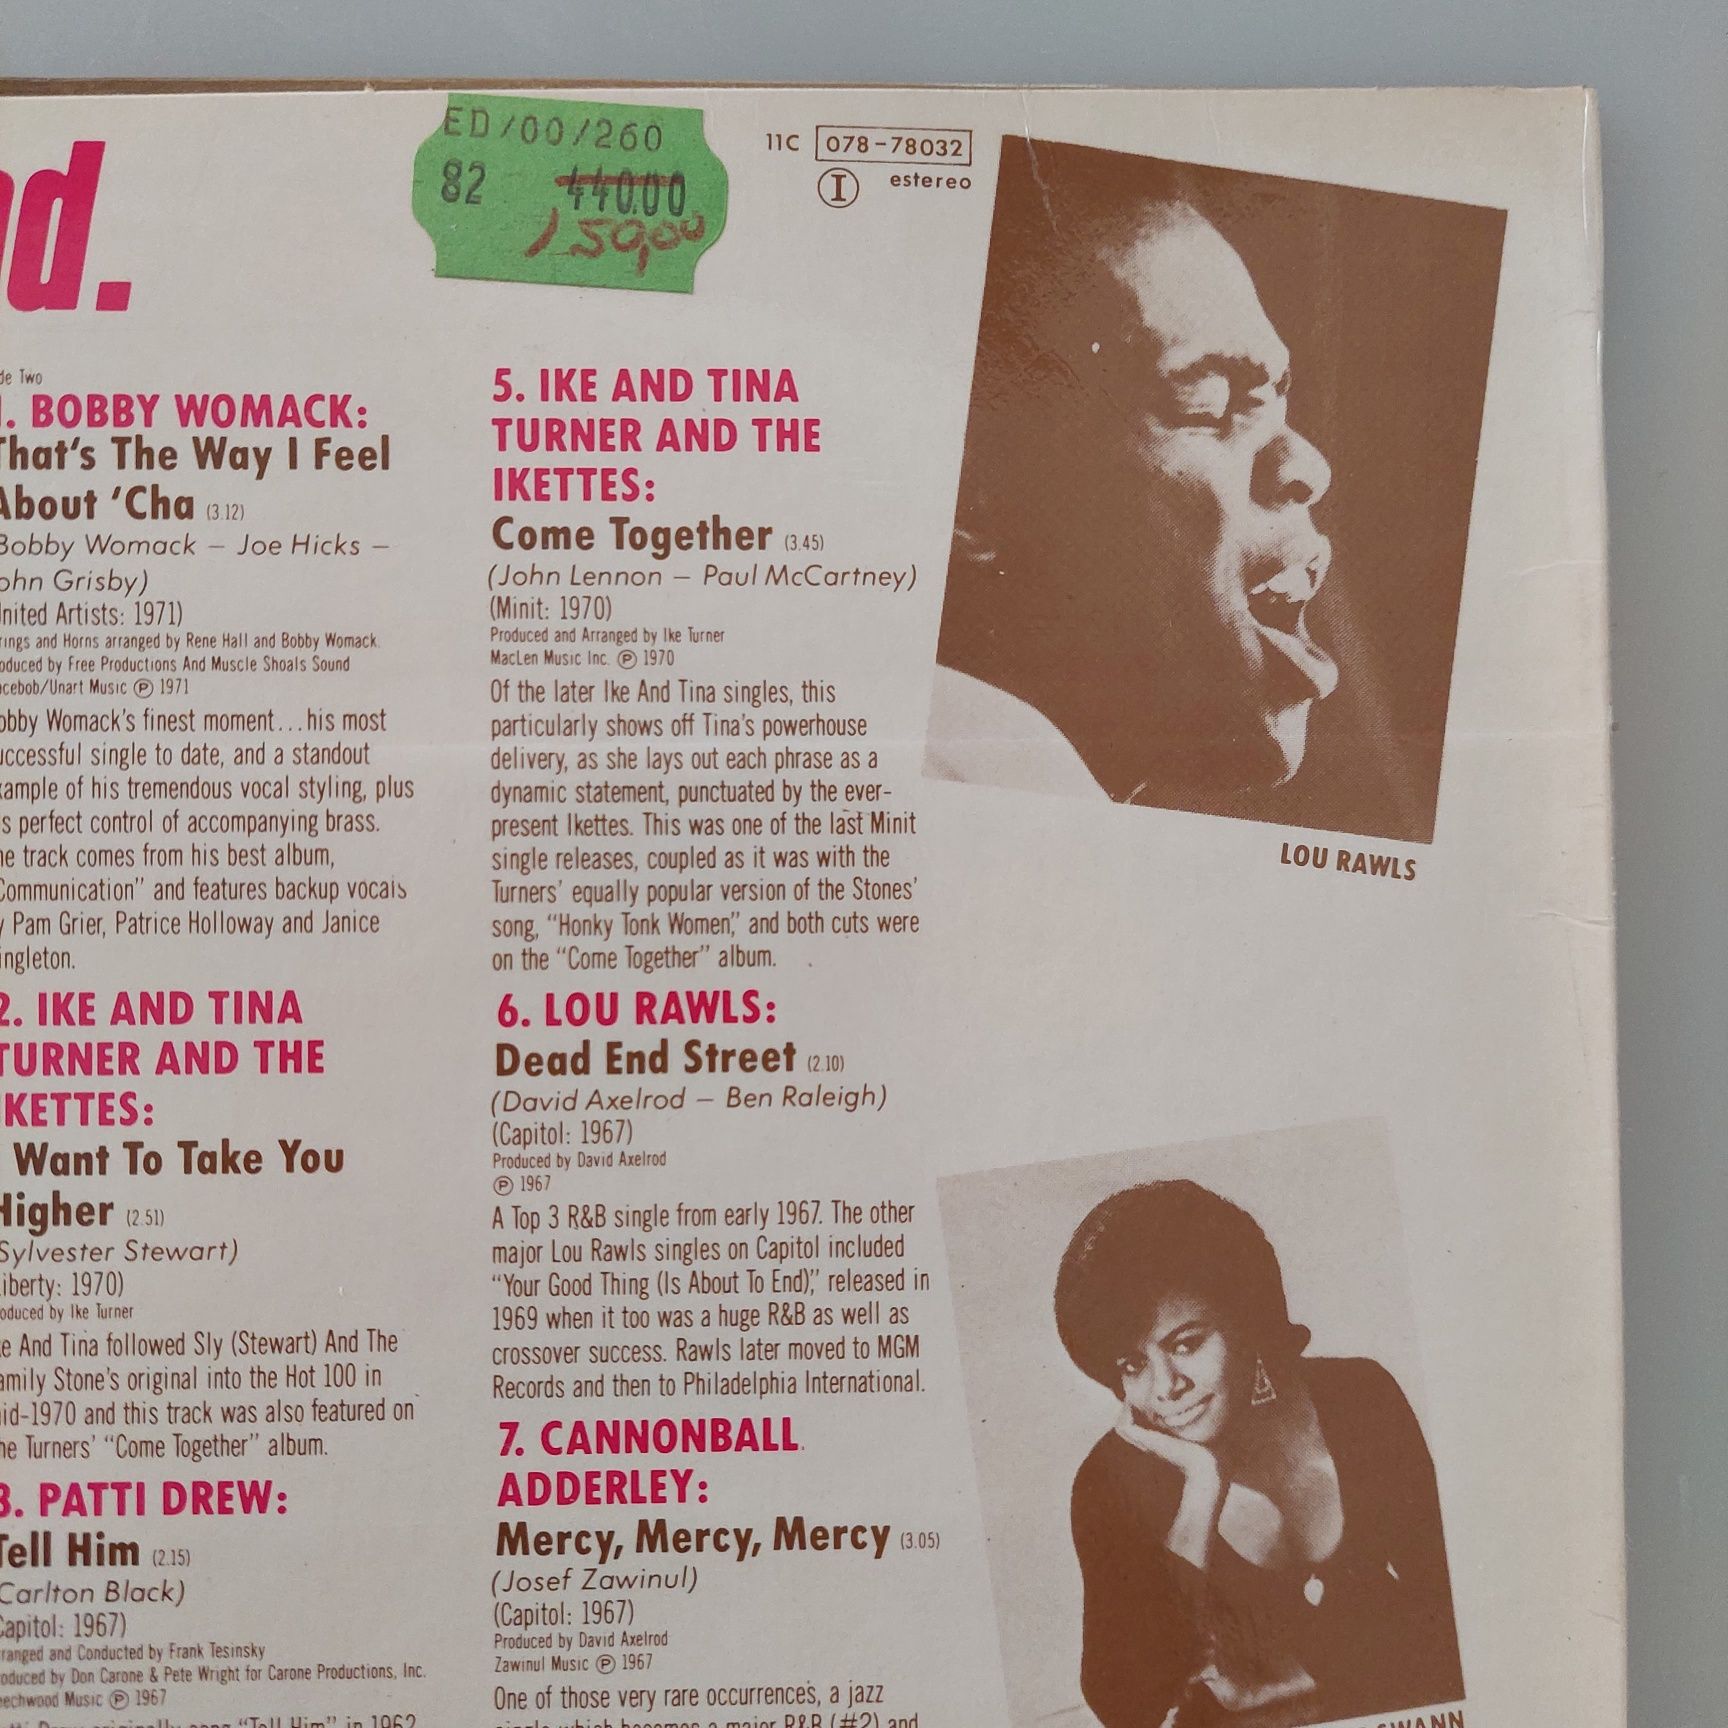 Out Of Sight, Out Of Mind: American Soul 1966-72